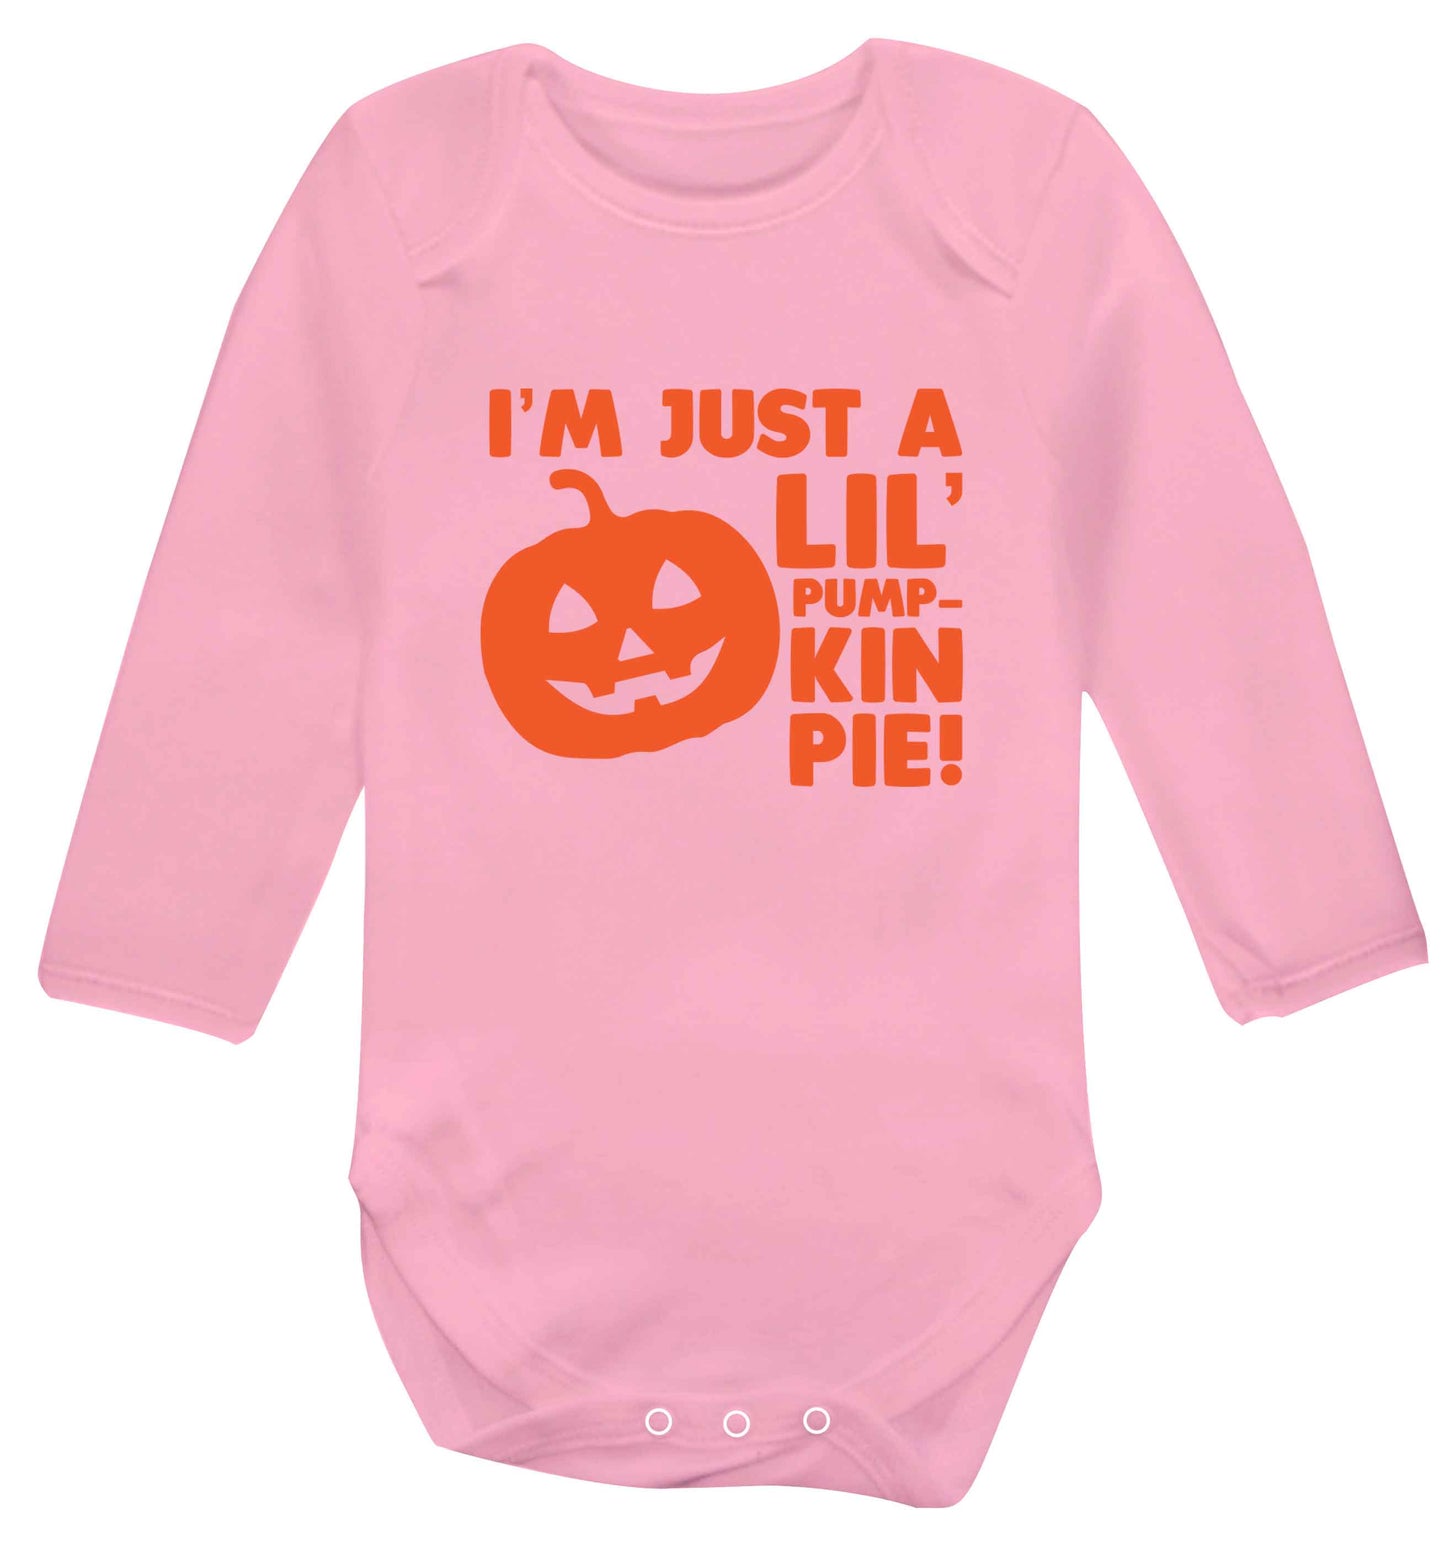 I'm just a lil' pumpkin pie baby vest long sleeved pale pink 6-12 months